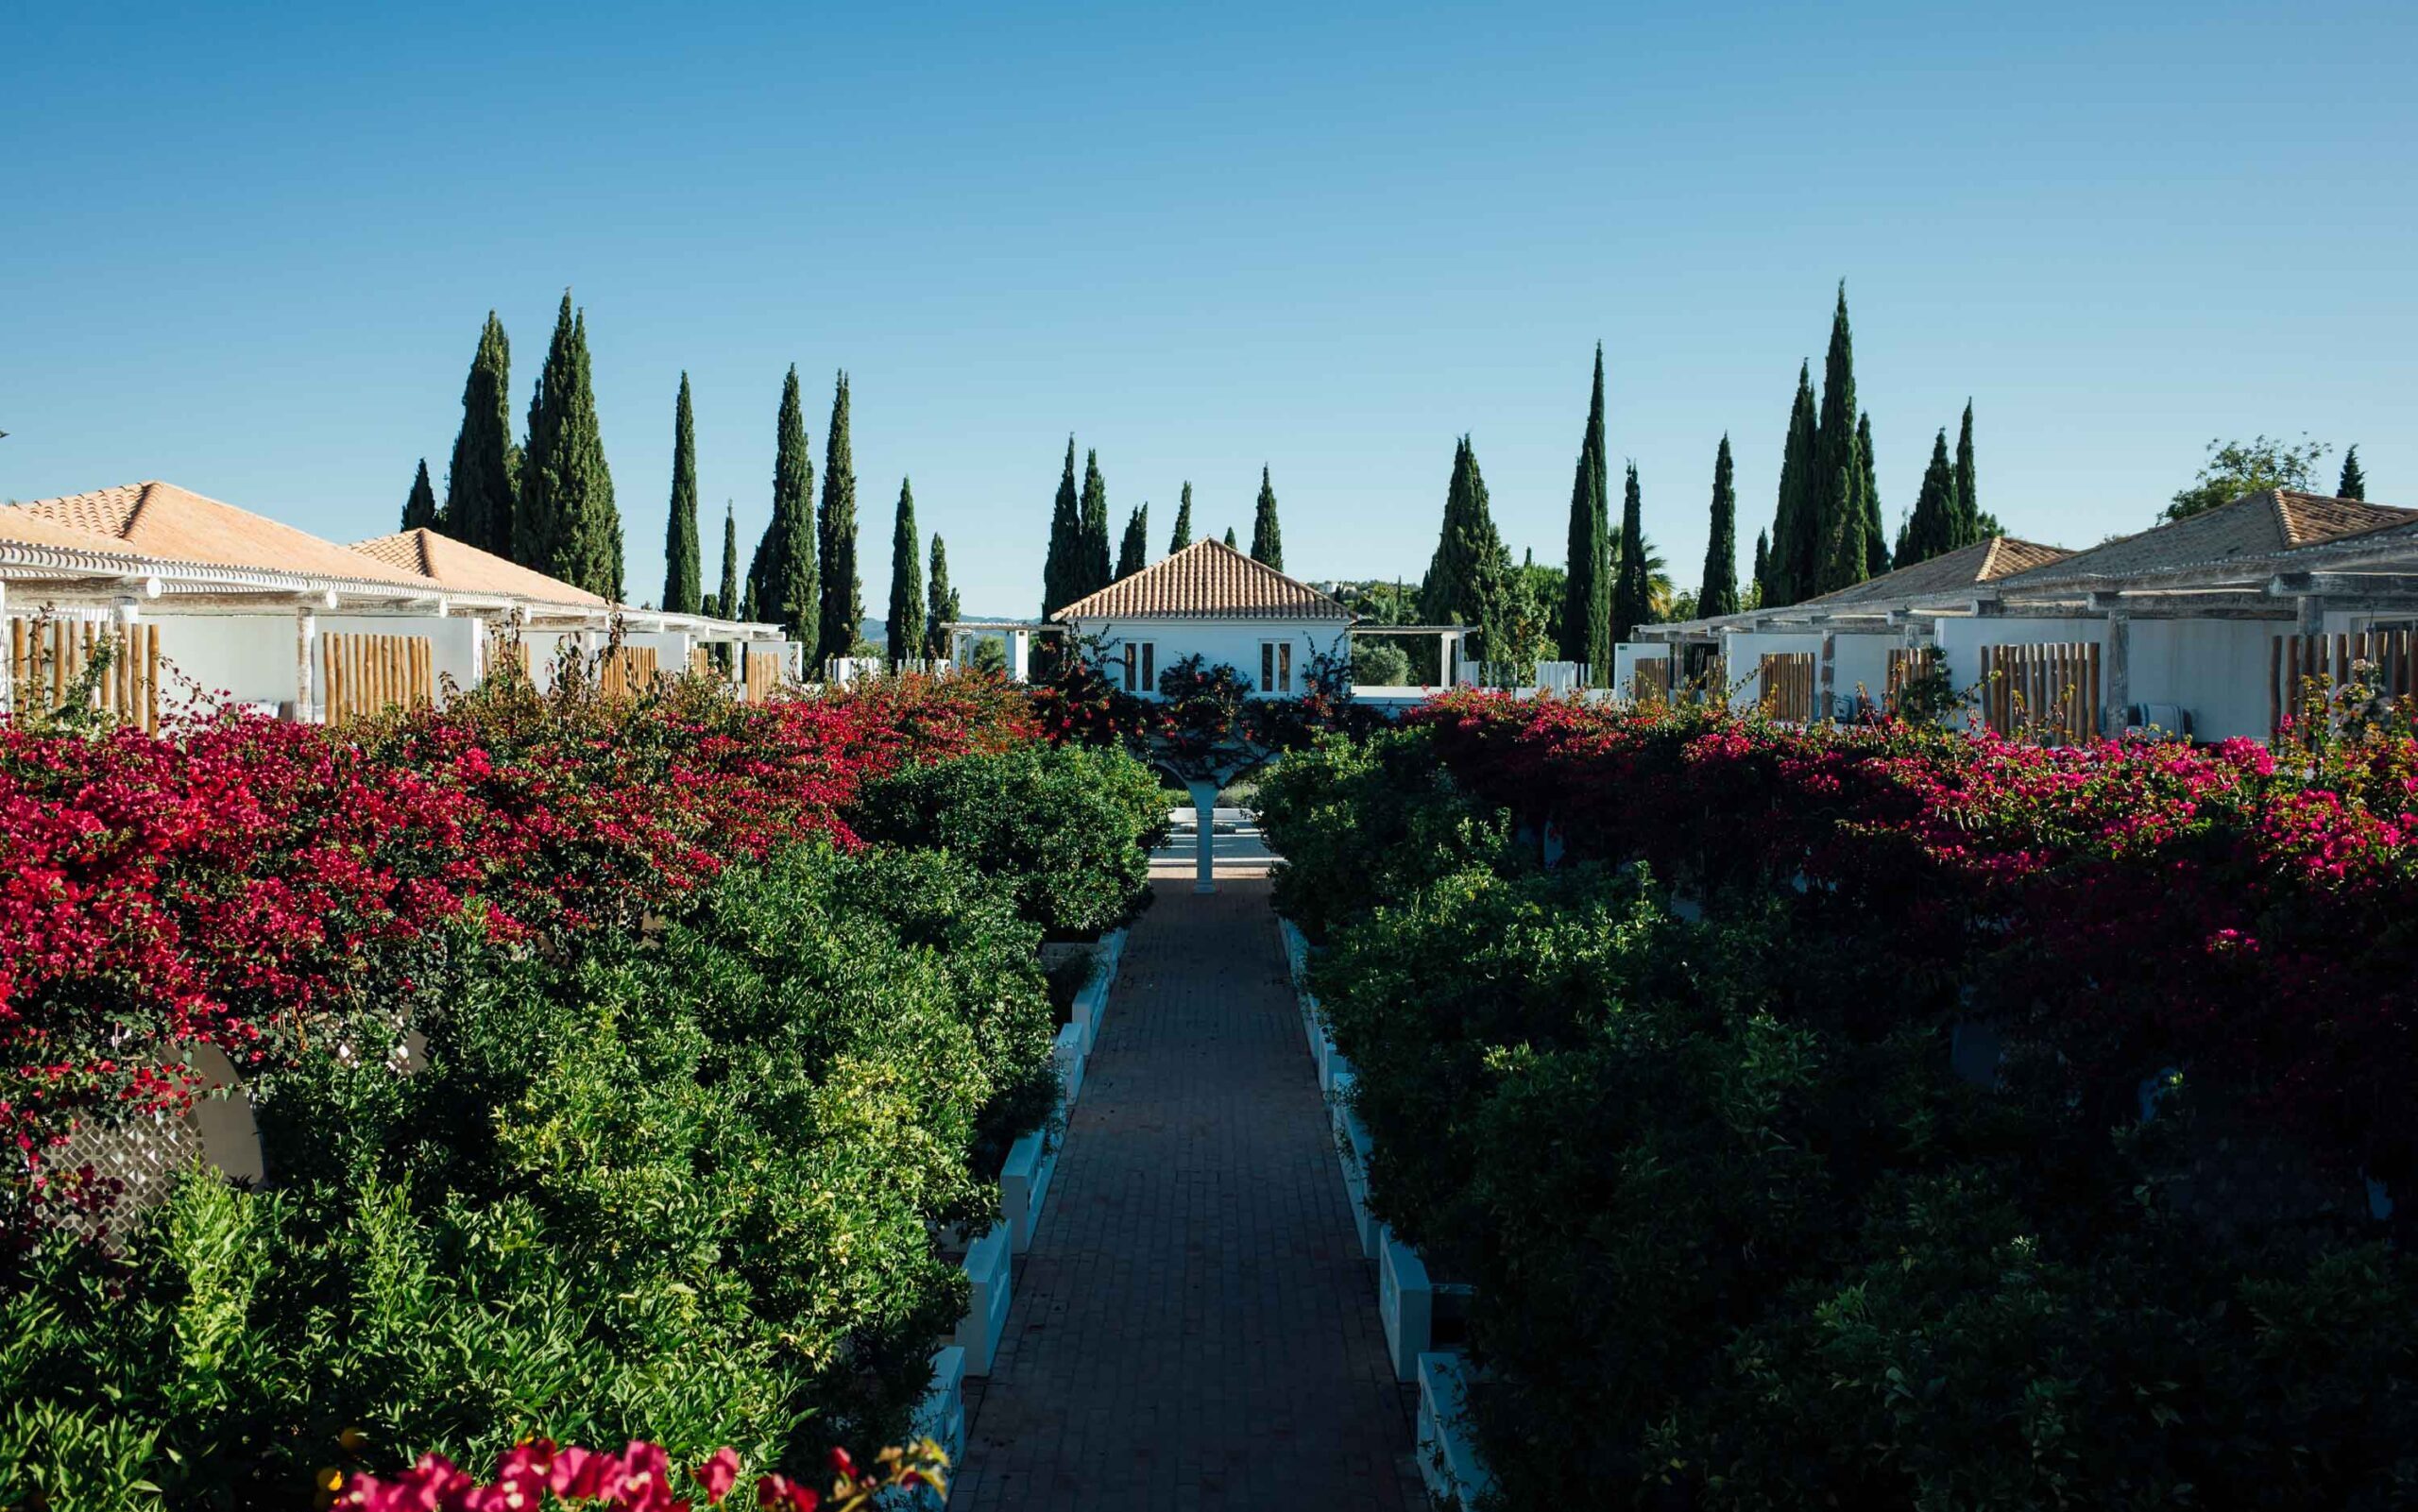 Experience the Pastoral Side of the Algarve at This Idyllic Boutique Hotel